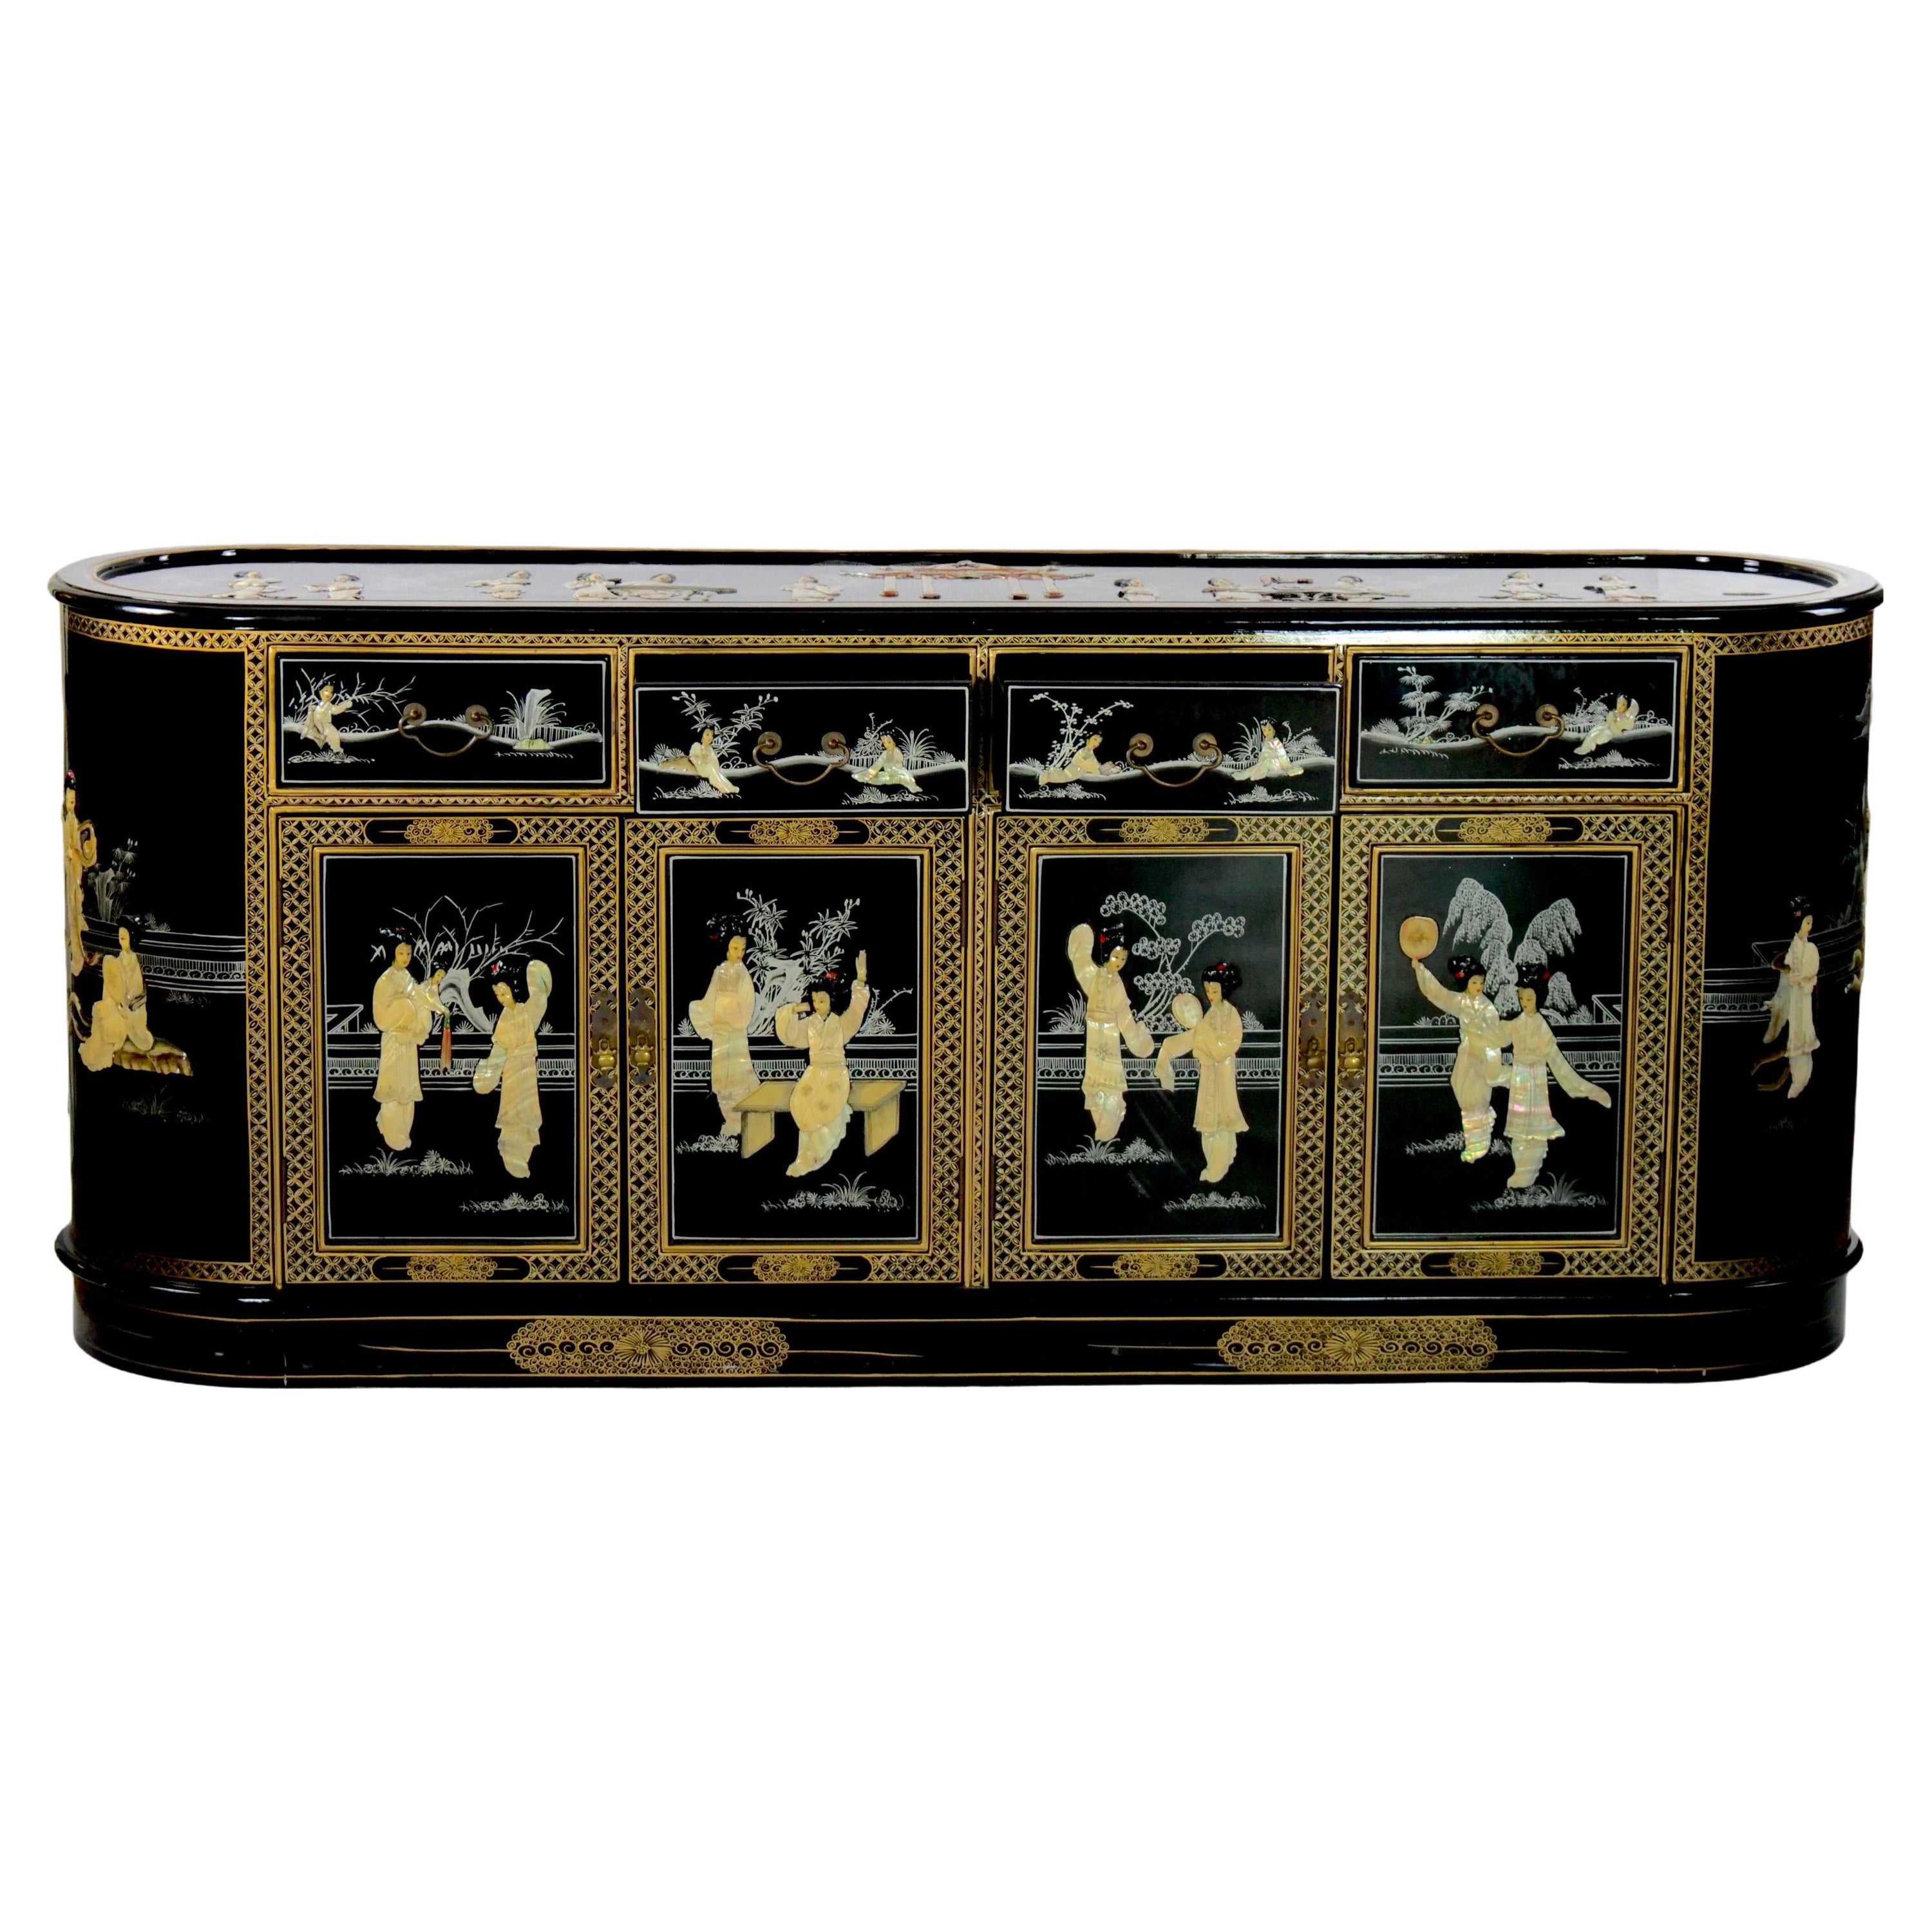 Black Lacquered Wood Hand Painted / Mother of Pearl Credenza